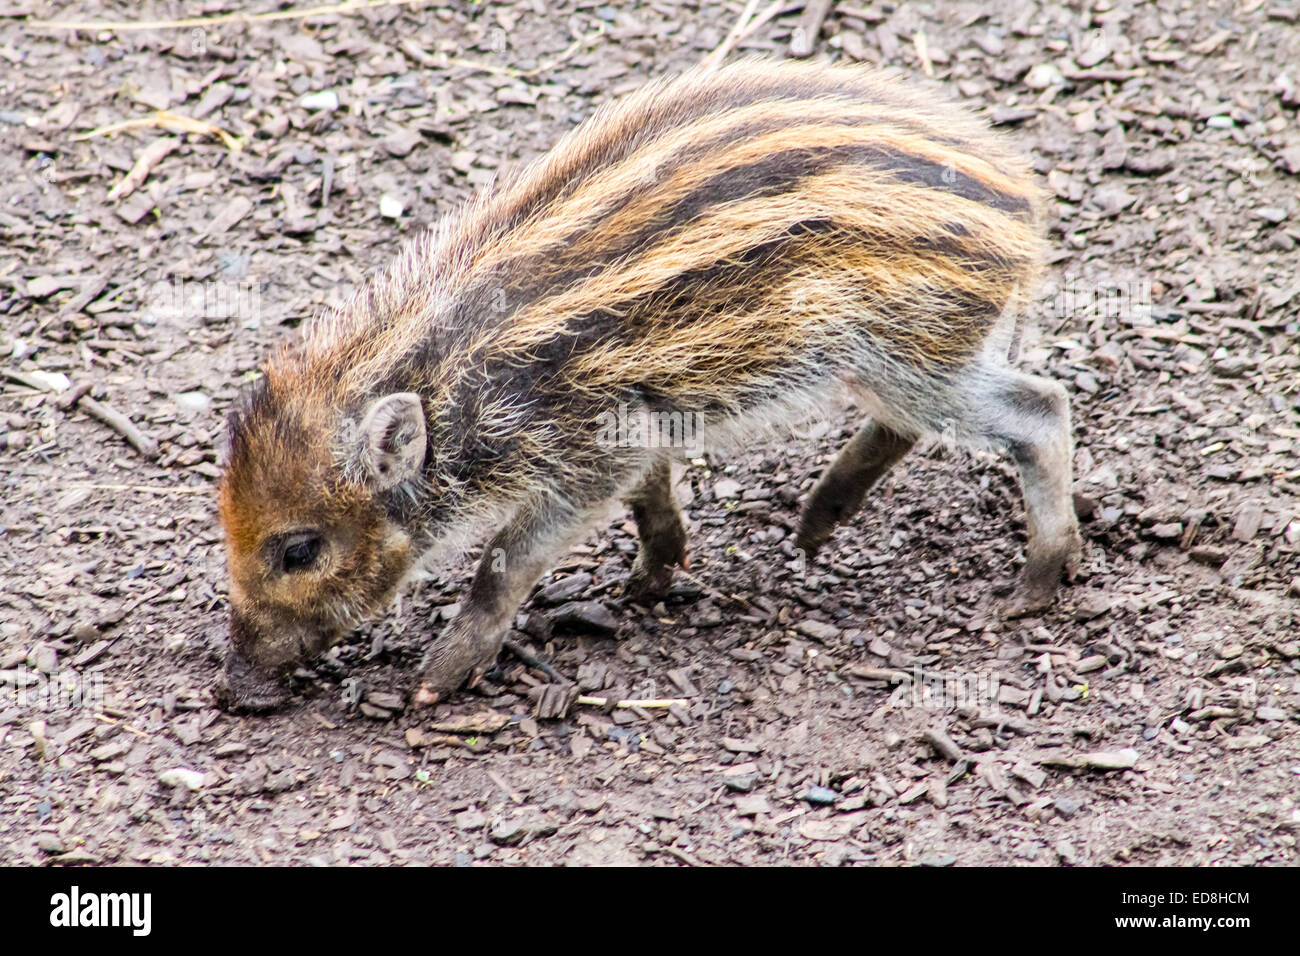 Young and small Visayan Warty Piglet, sniffing the soil. Stock Photo